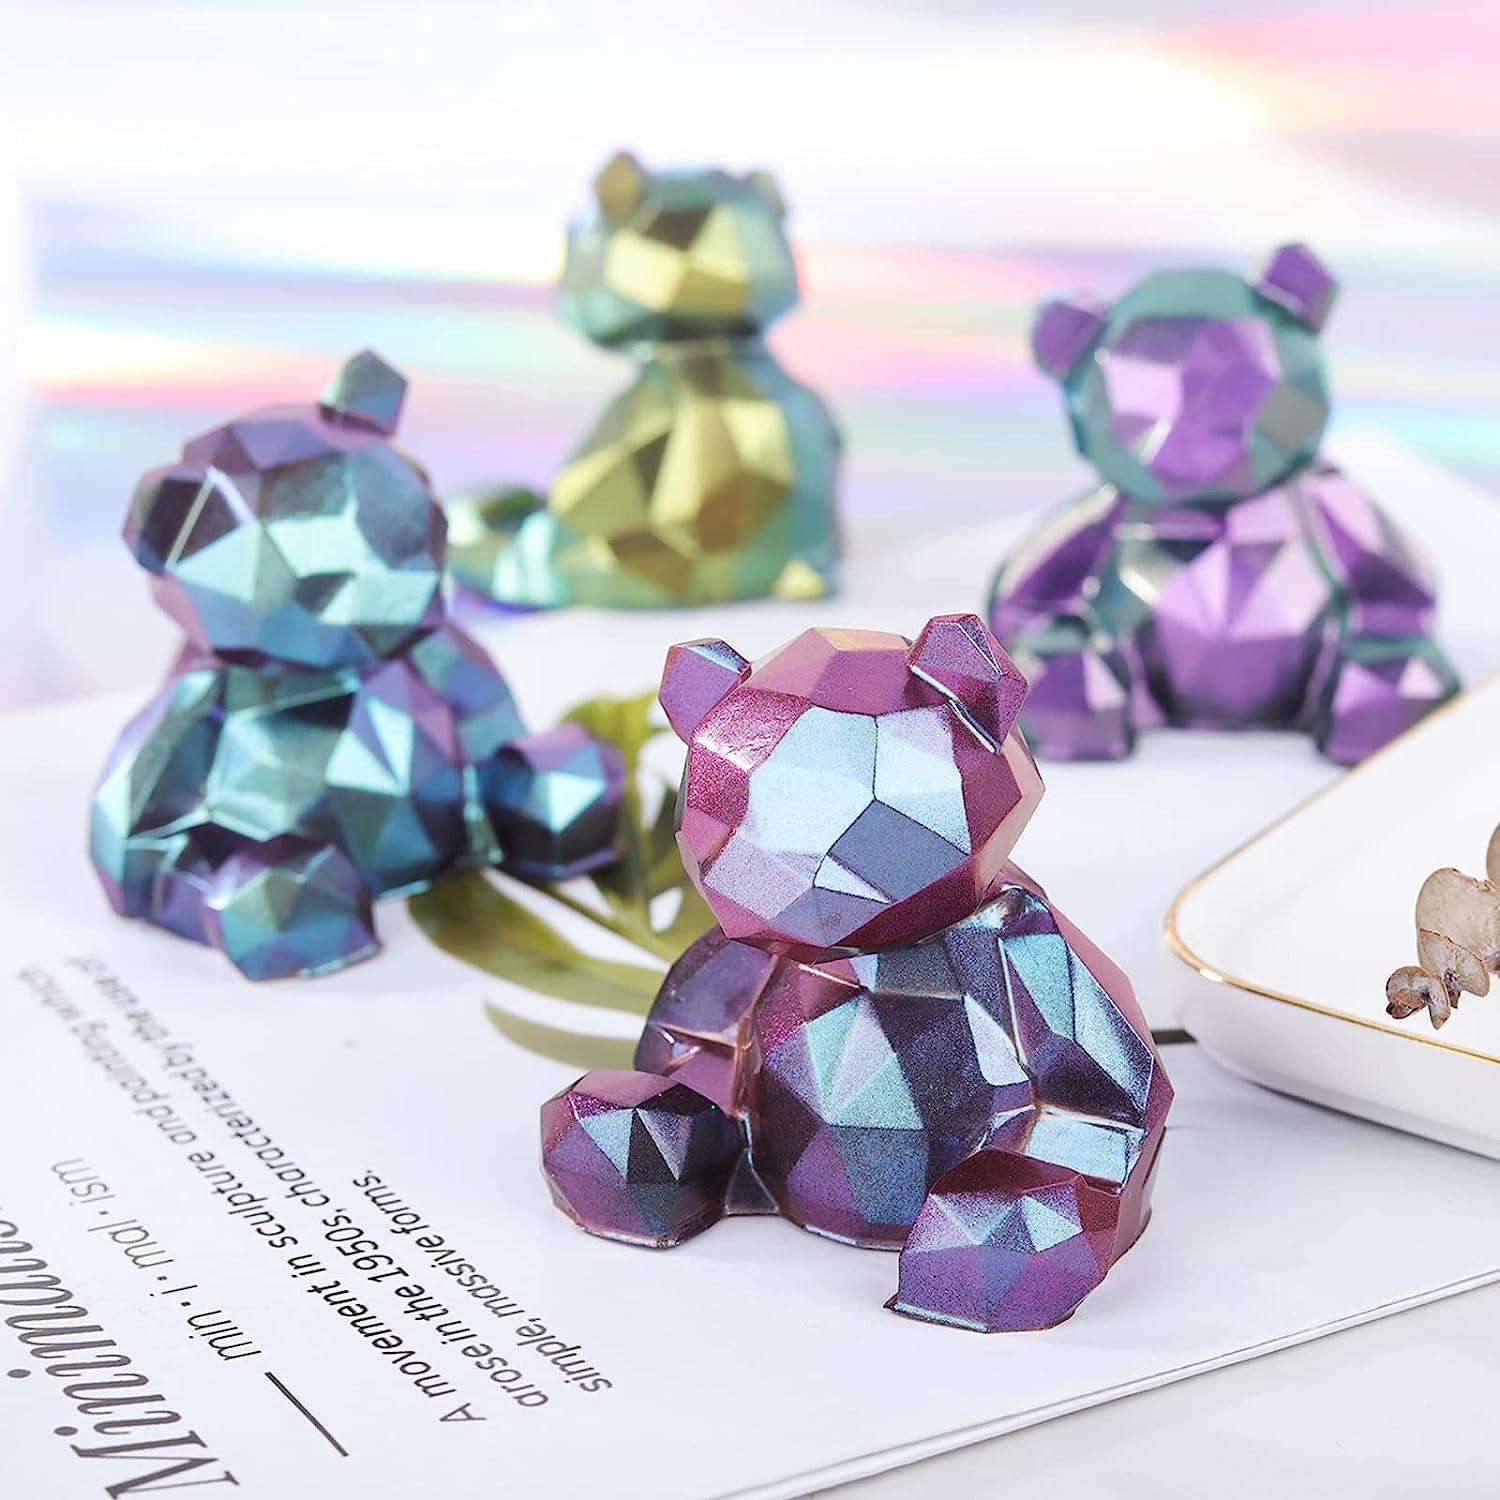 LET'S RESIN Chameleon Series- The Difference Between All of Our